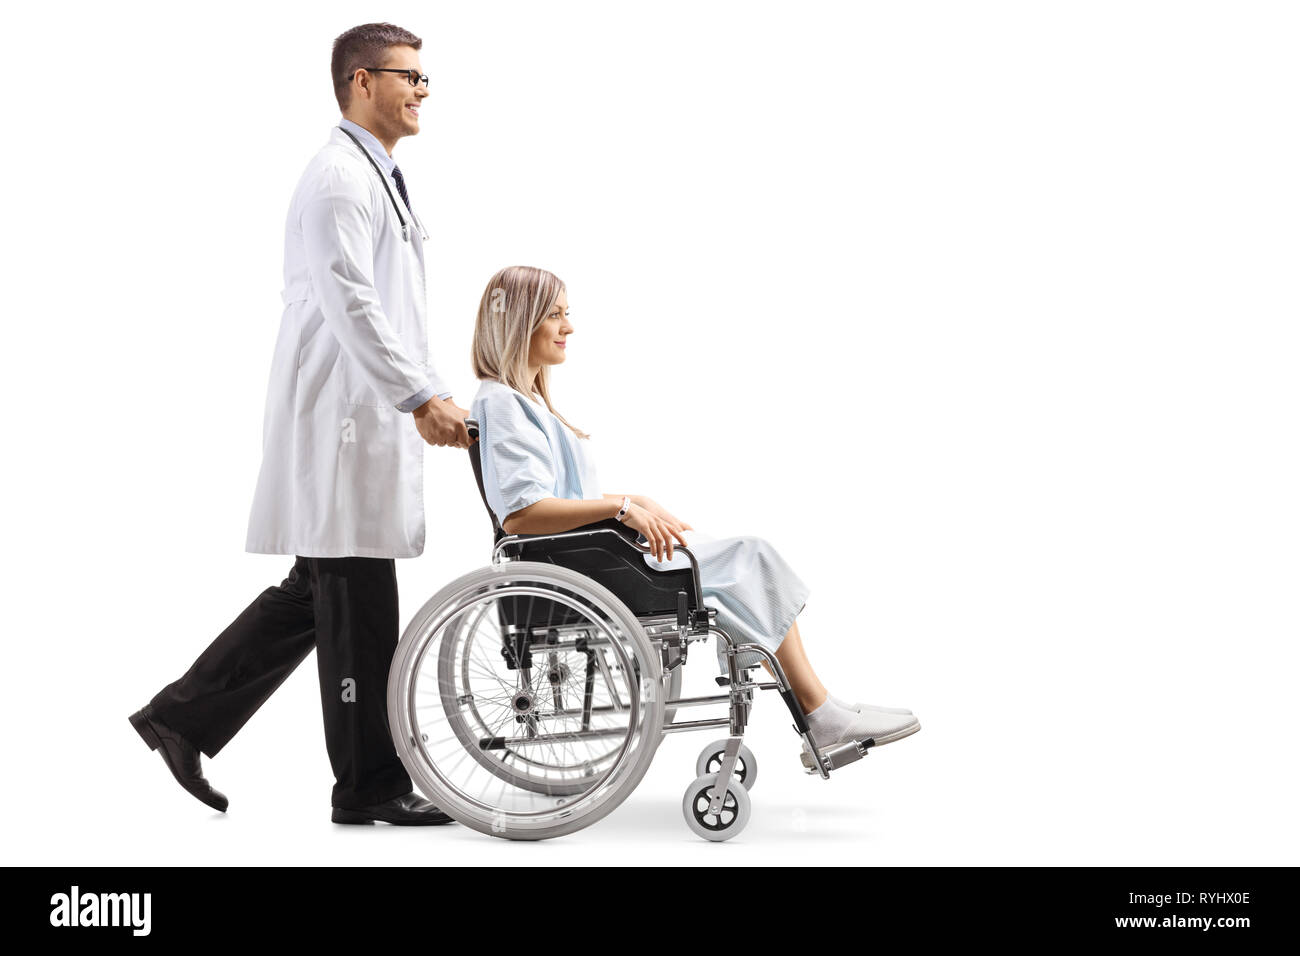 Full length shot of a young male doctor pushing a woman in a wheelchair isolated on white background Stock Photo